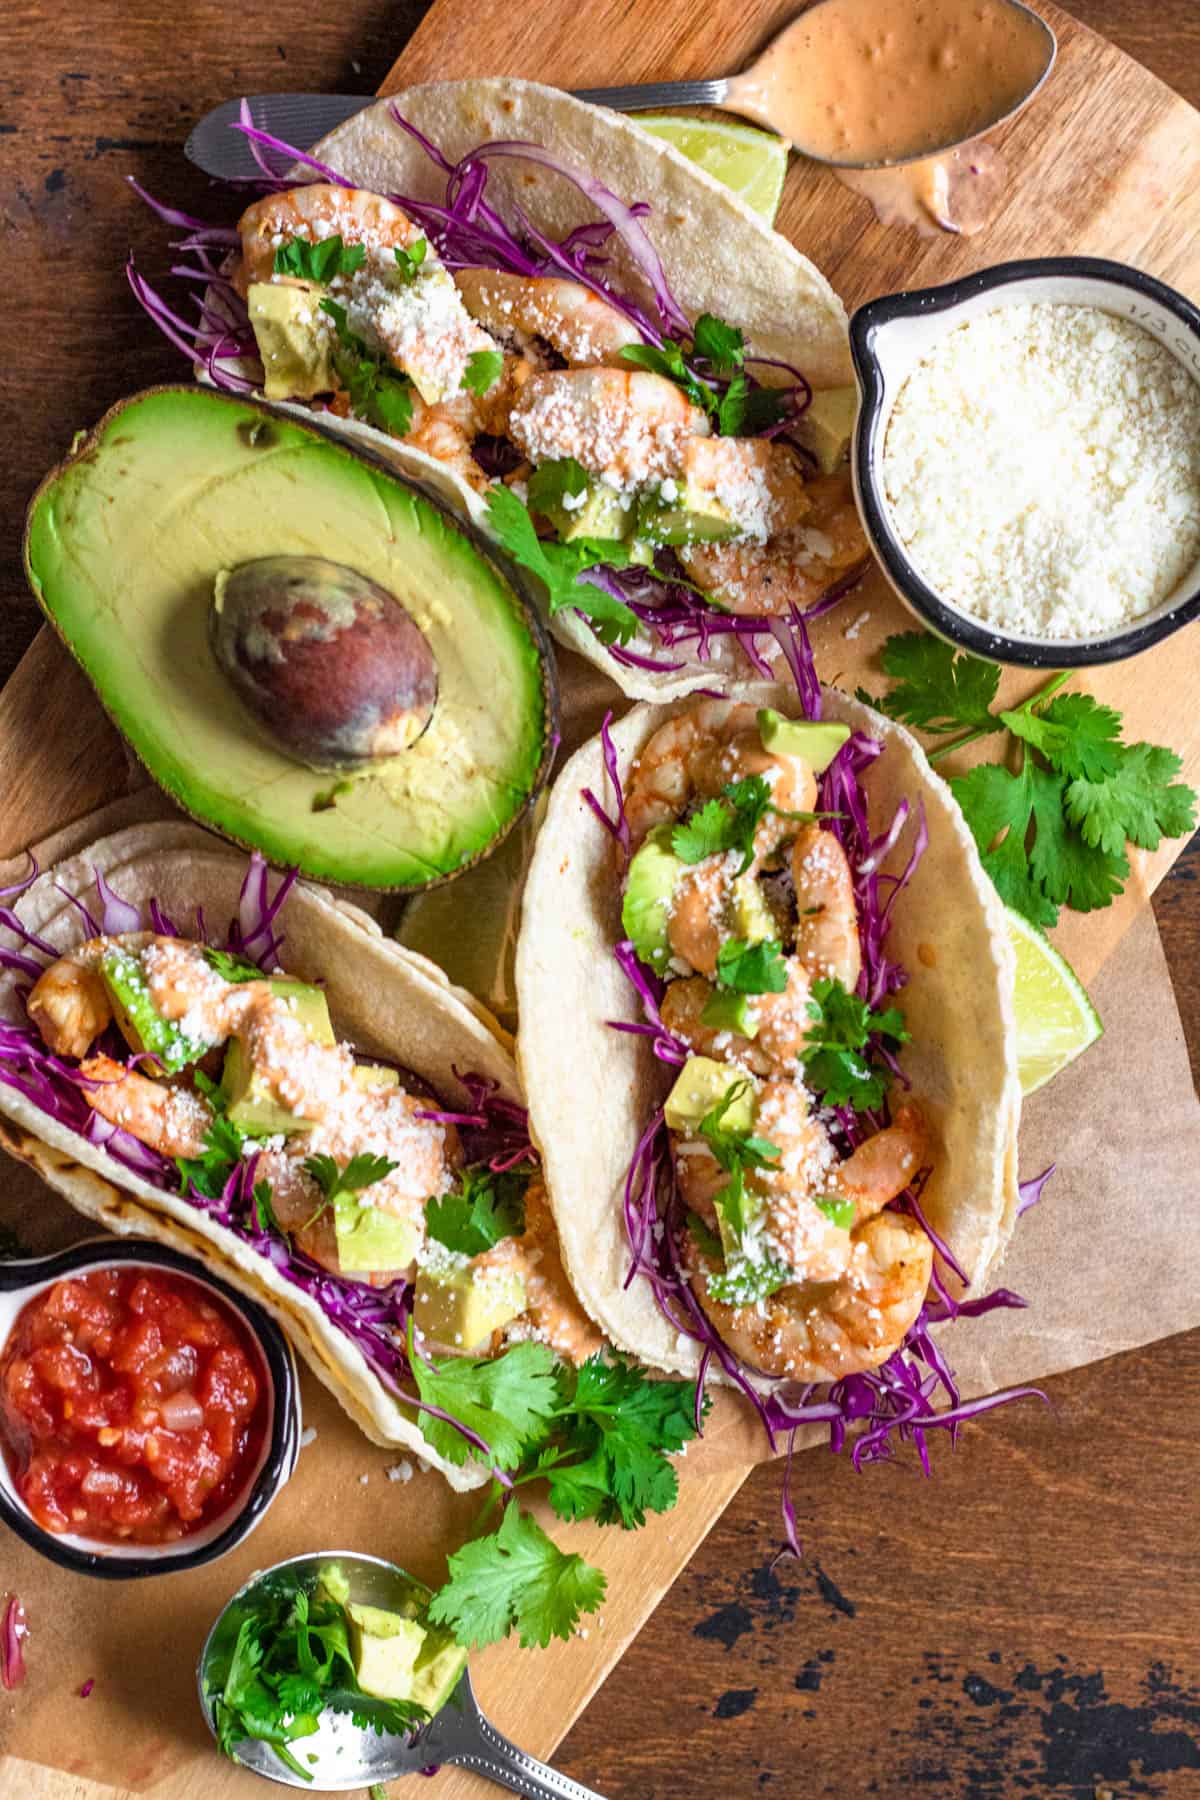 3 shrimp corn tacos with red cabbage, avocado chunks and cotija cheese